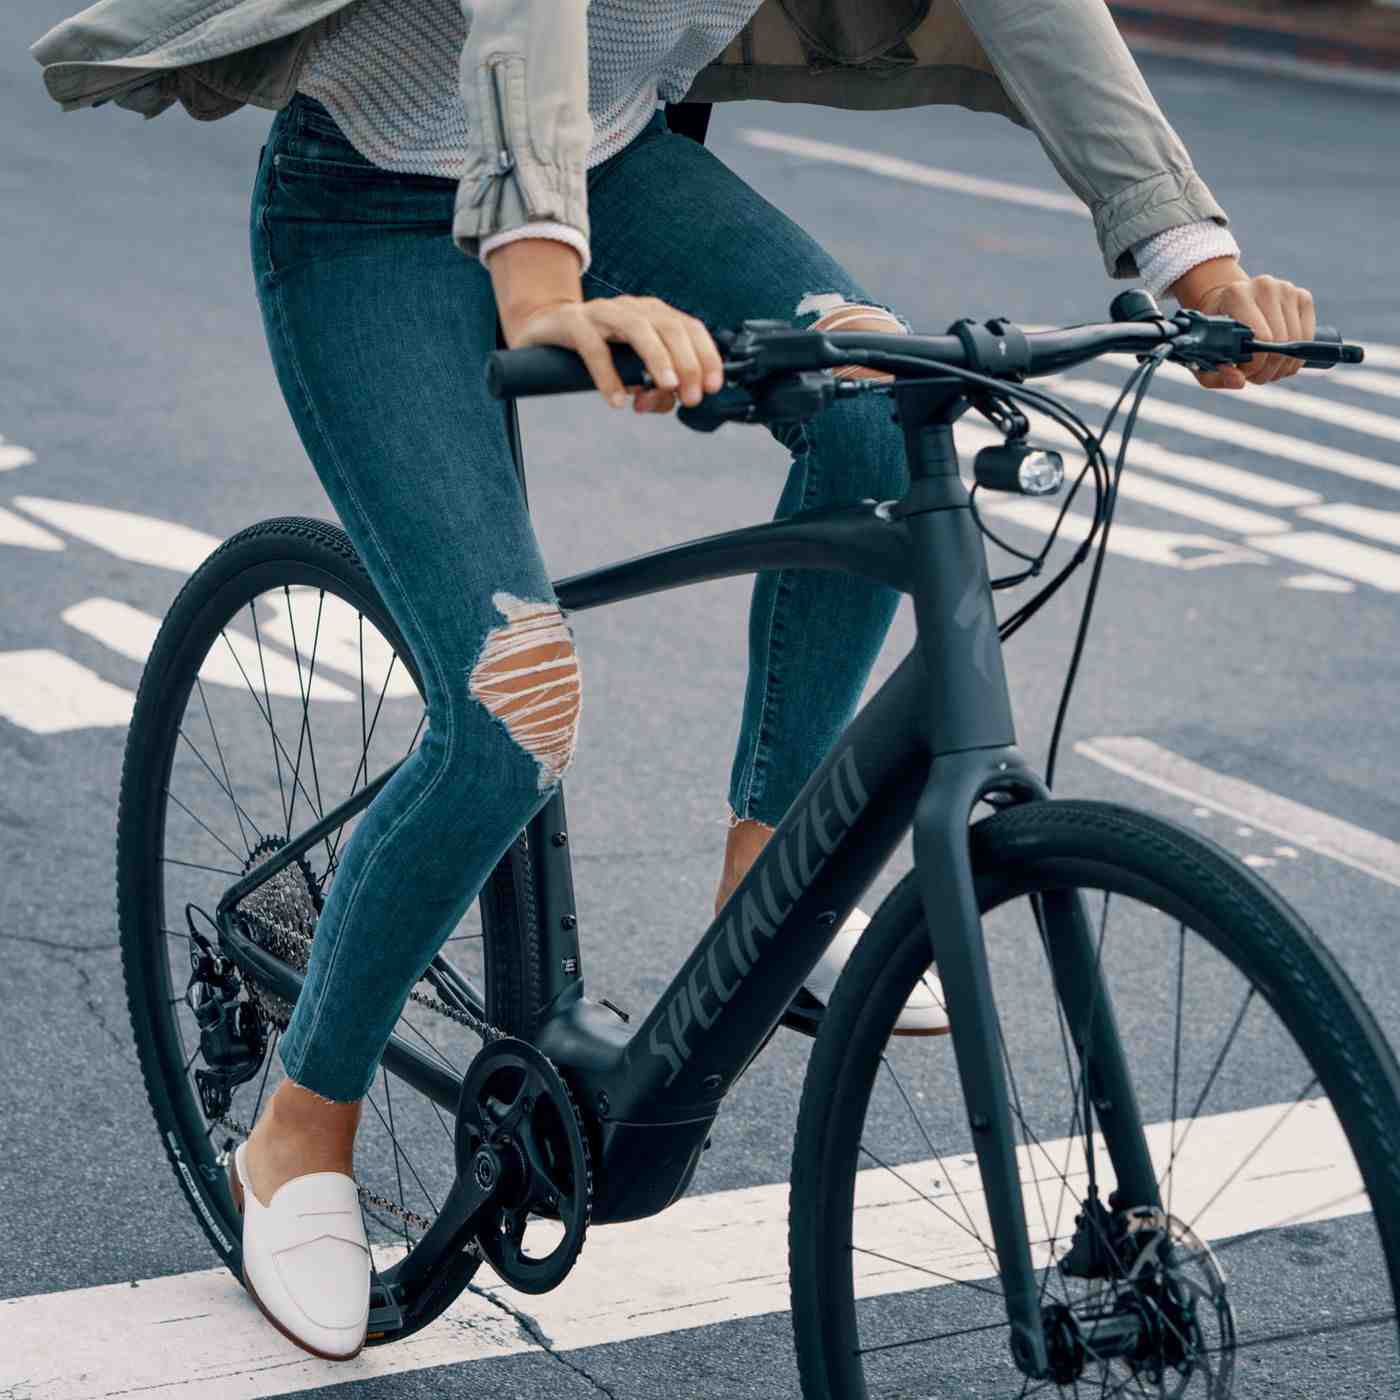 How many electric bikes are sold in the US?